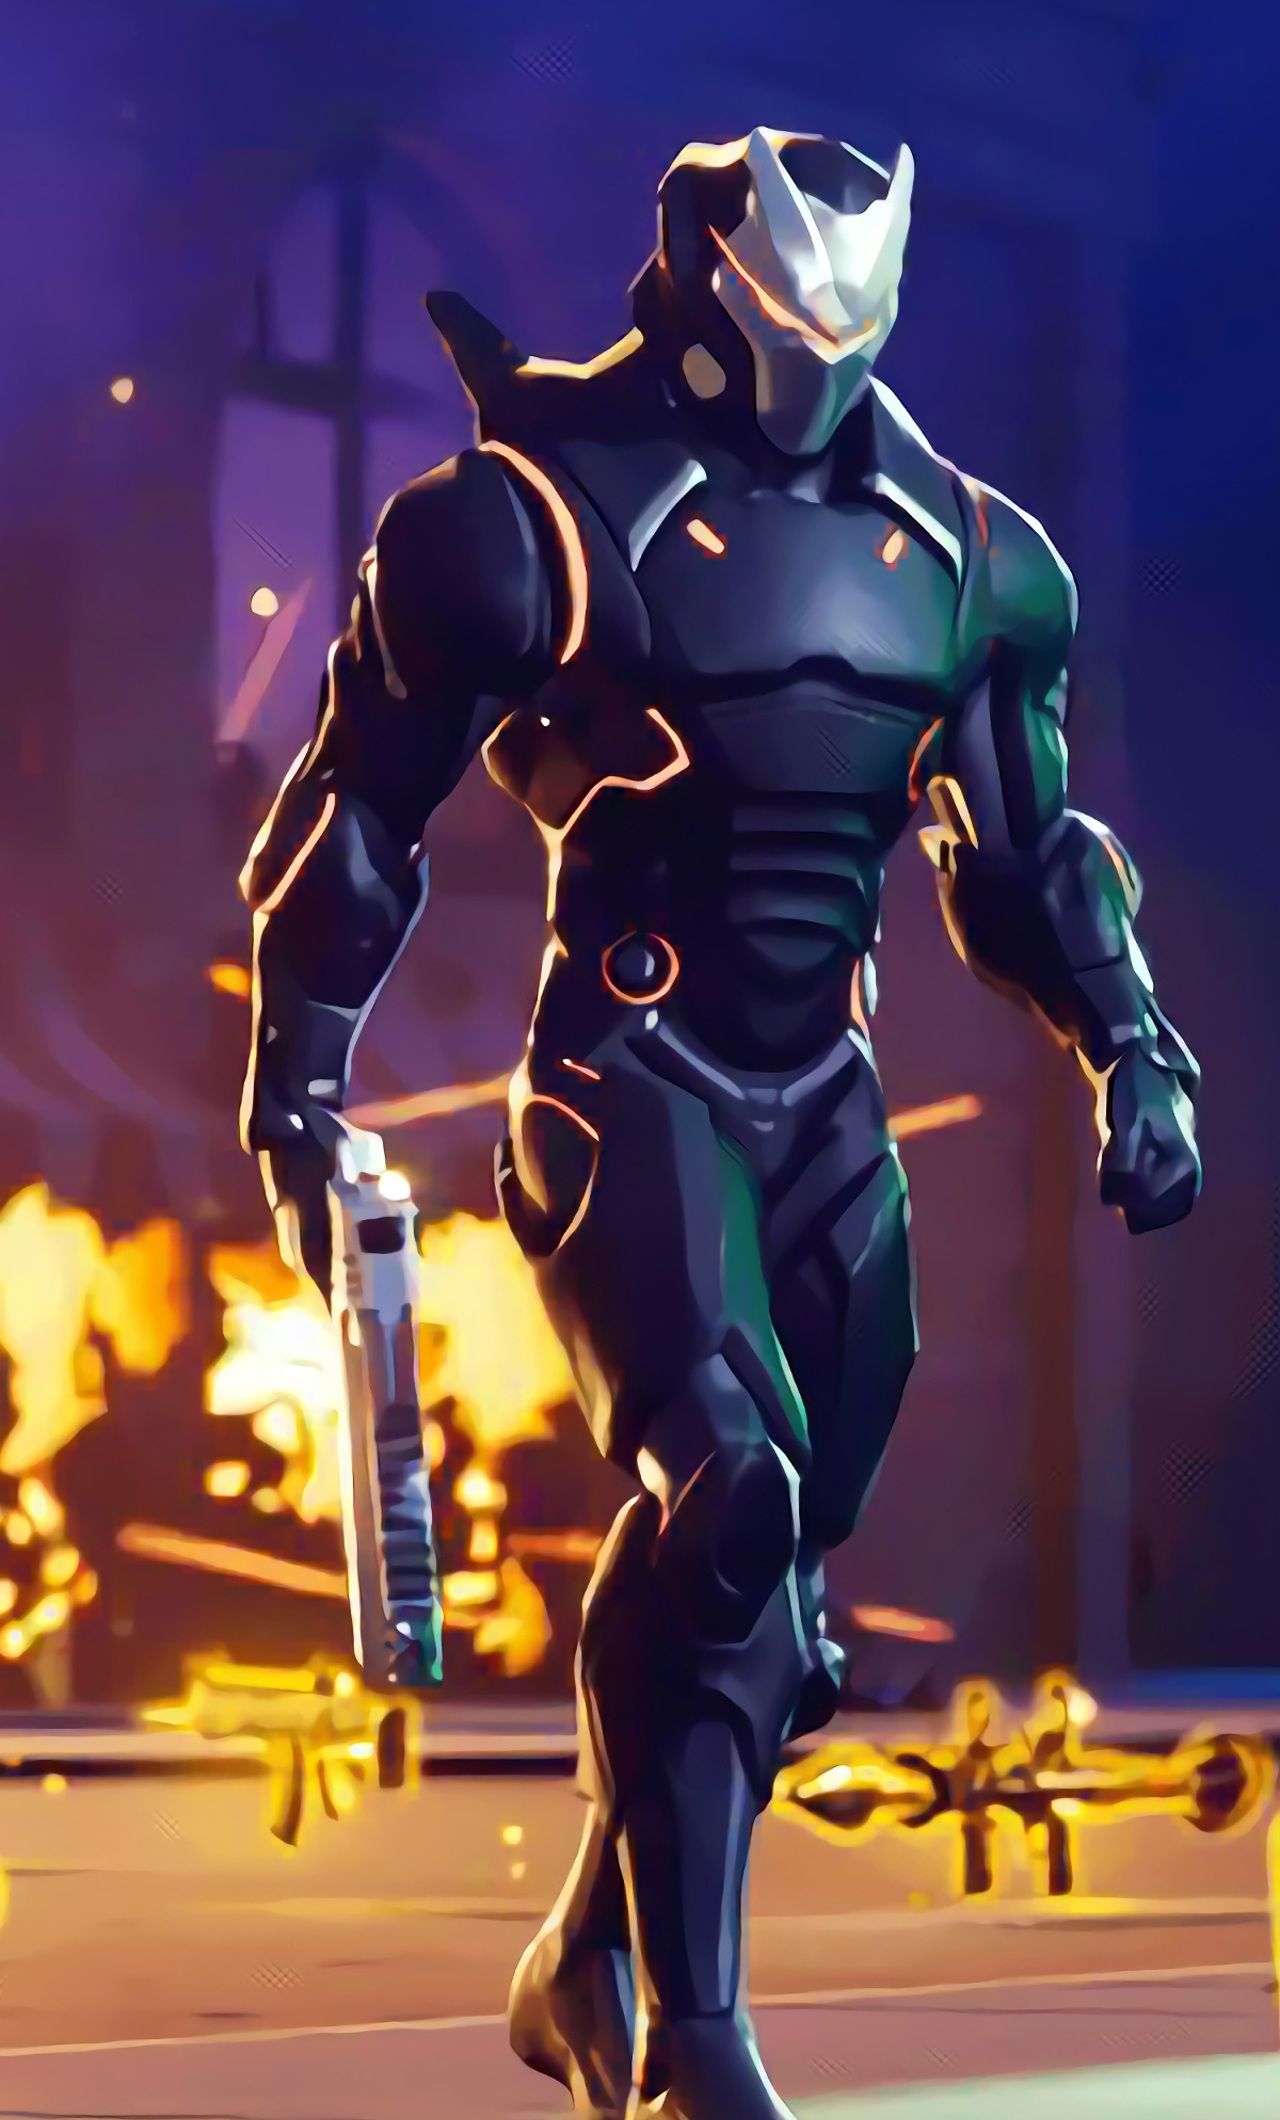 Fortnite Iphone Wallpaper  Androidfast25design  Fortnite Game wallpaper  iphone Gamer pics